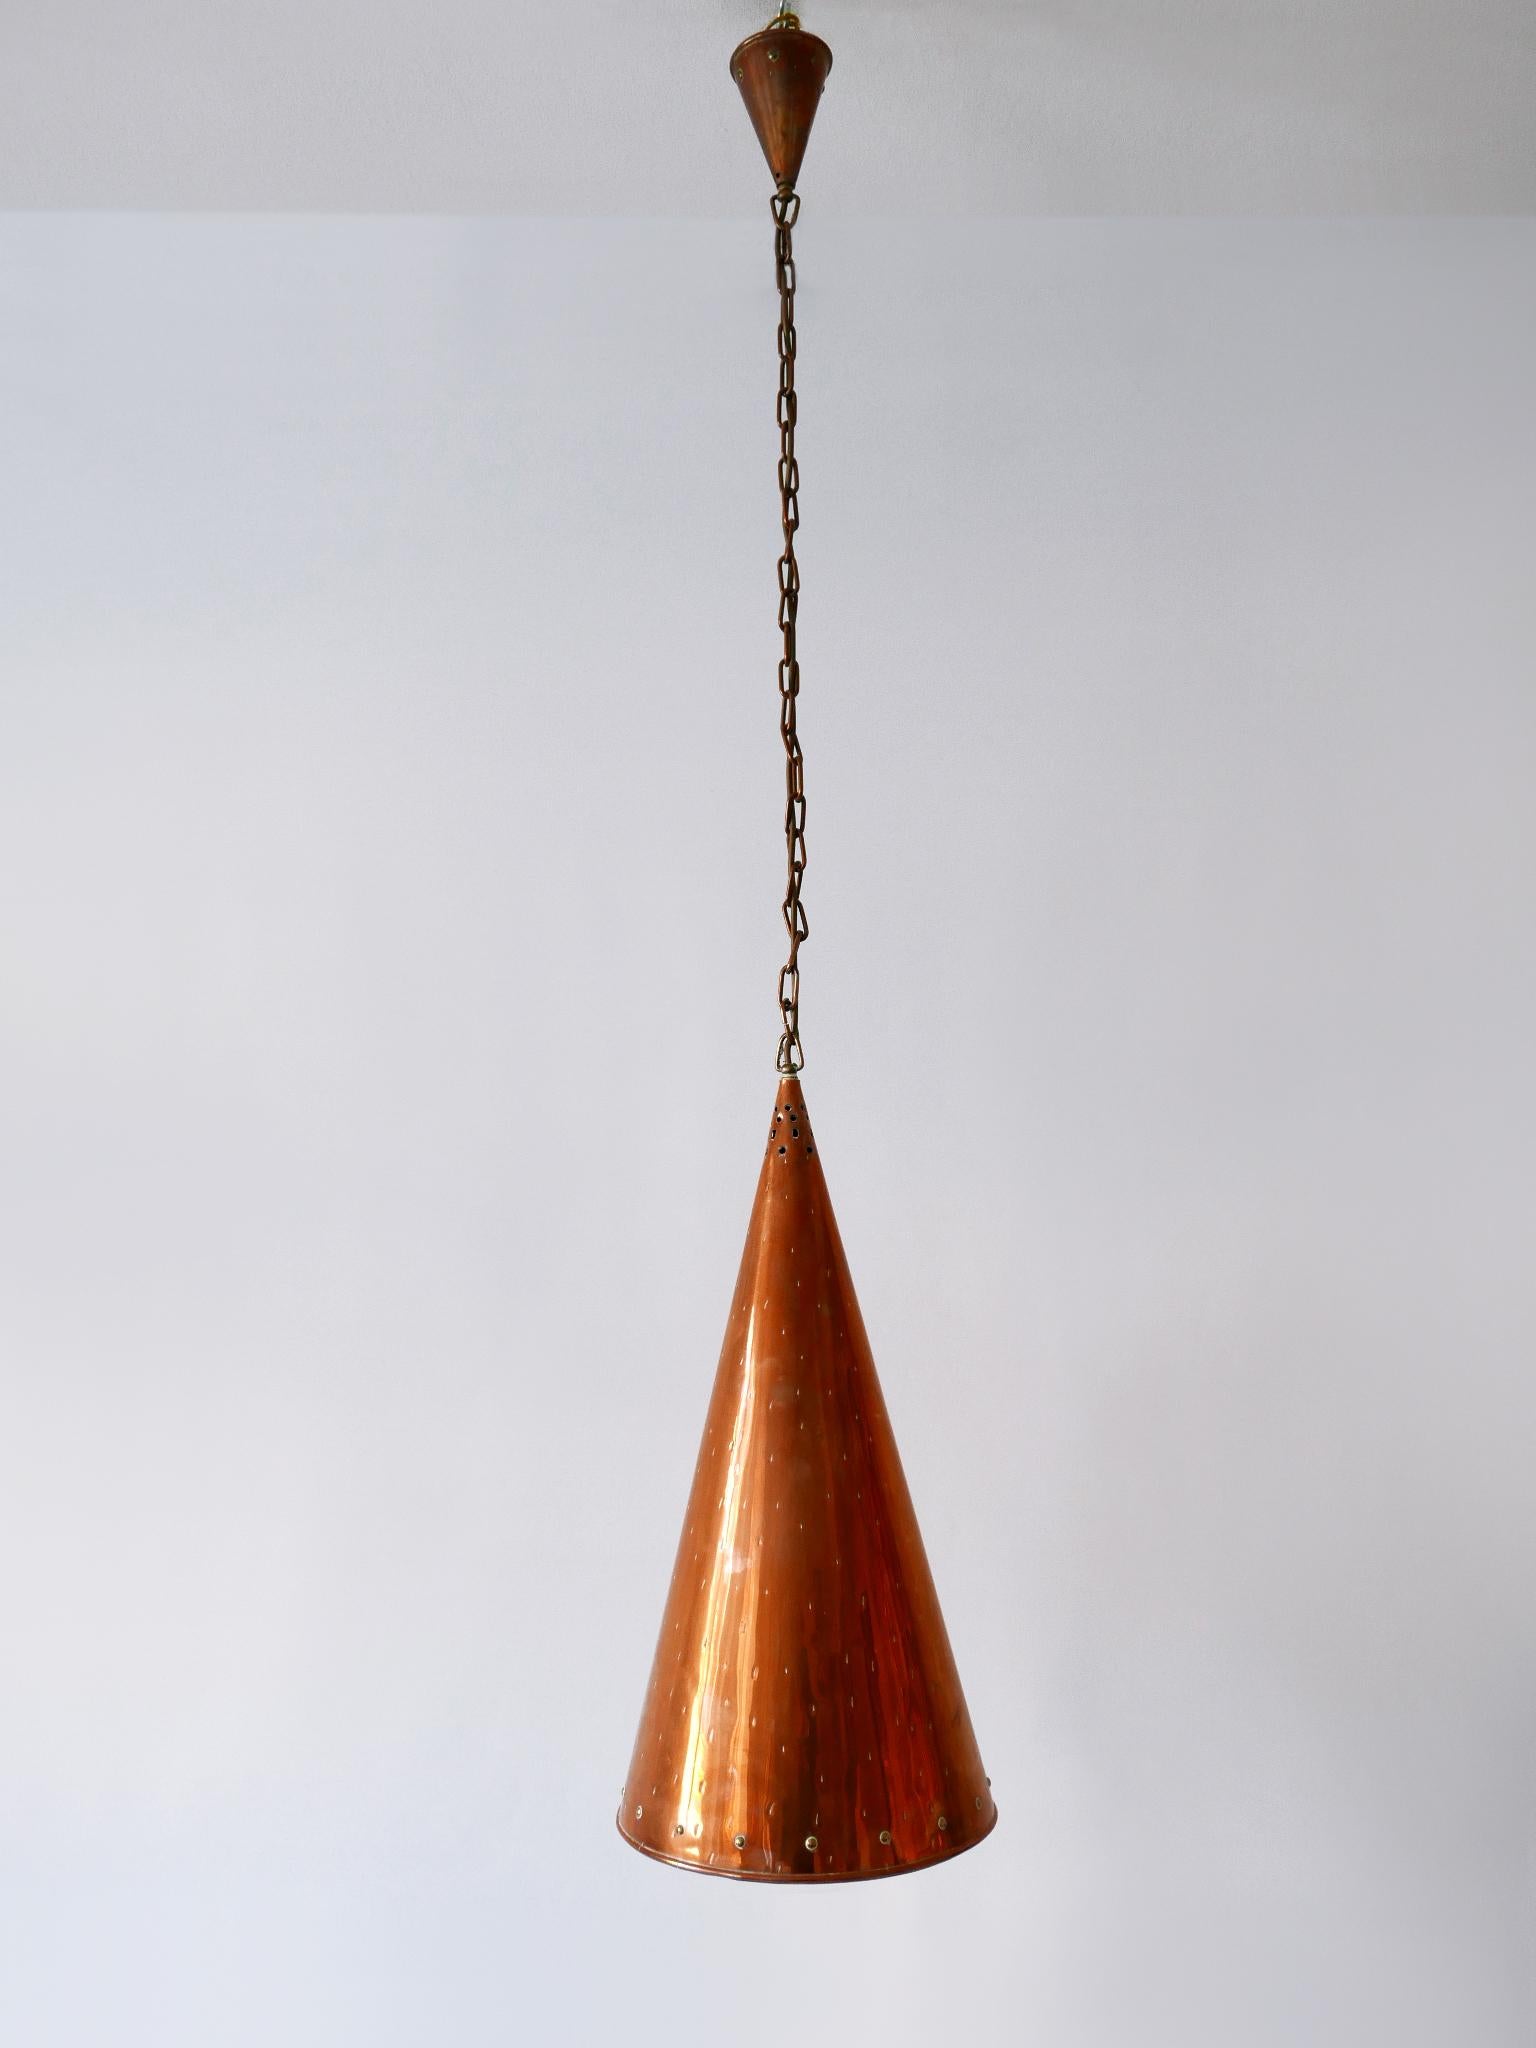 XL Mid Century Modern Copper Pendant Lamp by E.S. Horn Aalestrup Denmark 1950s For Sale 2